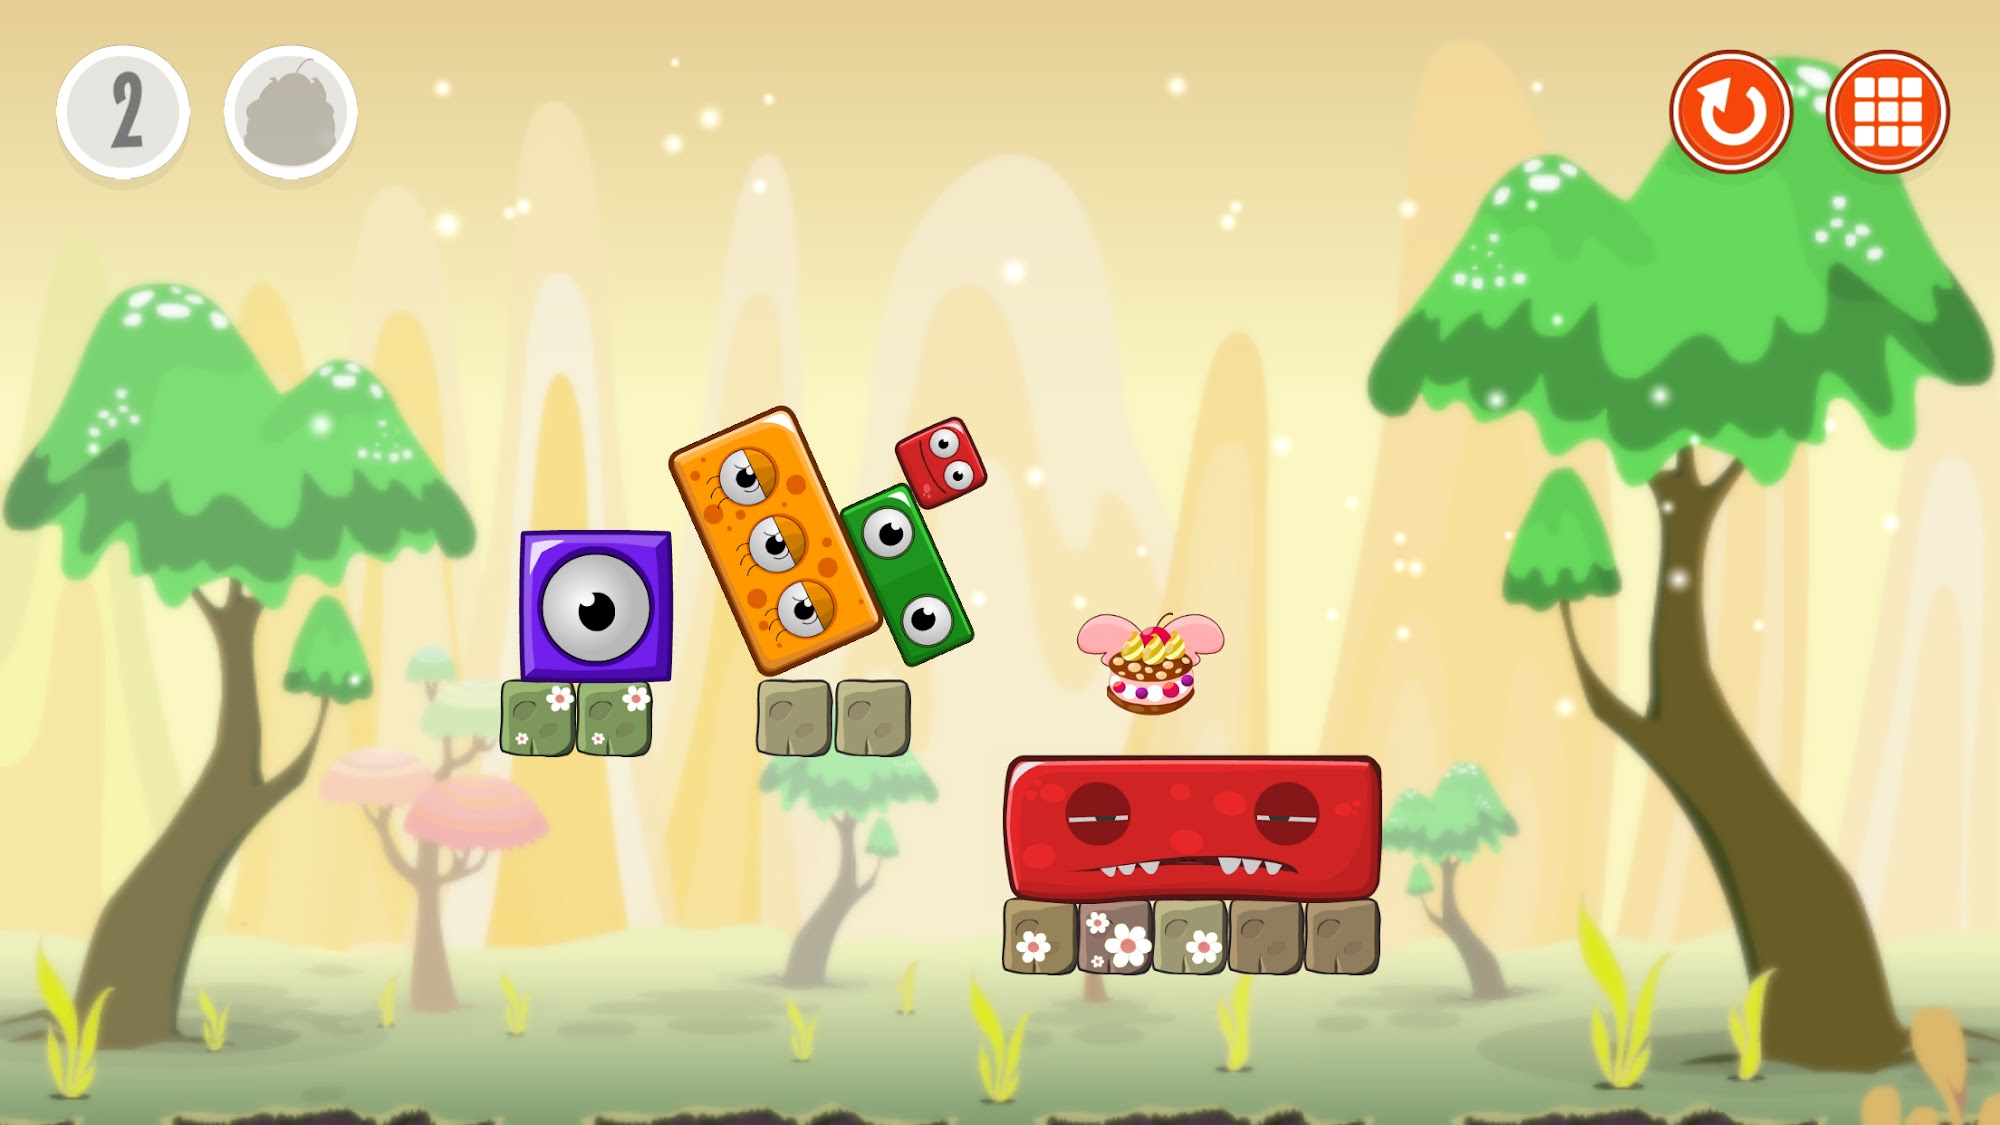 Monsterland 2. Physics puzzle game - Android game screenshots.